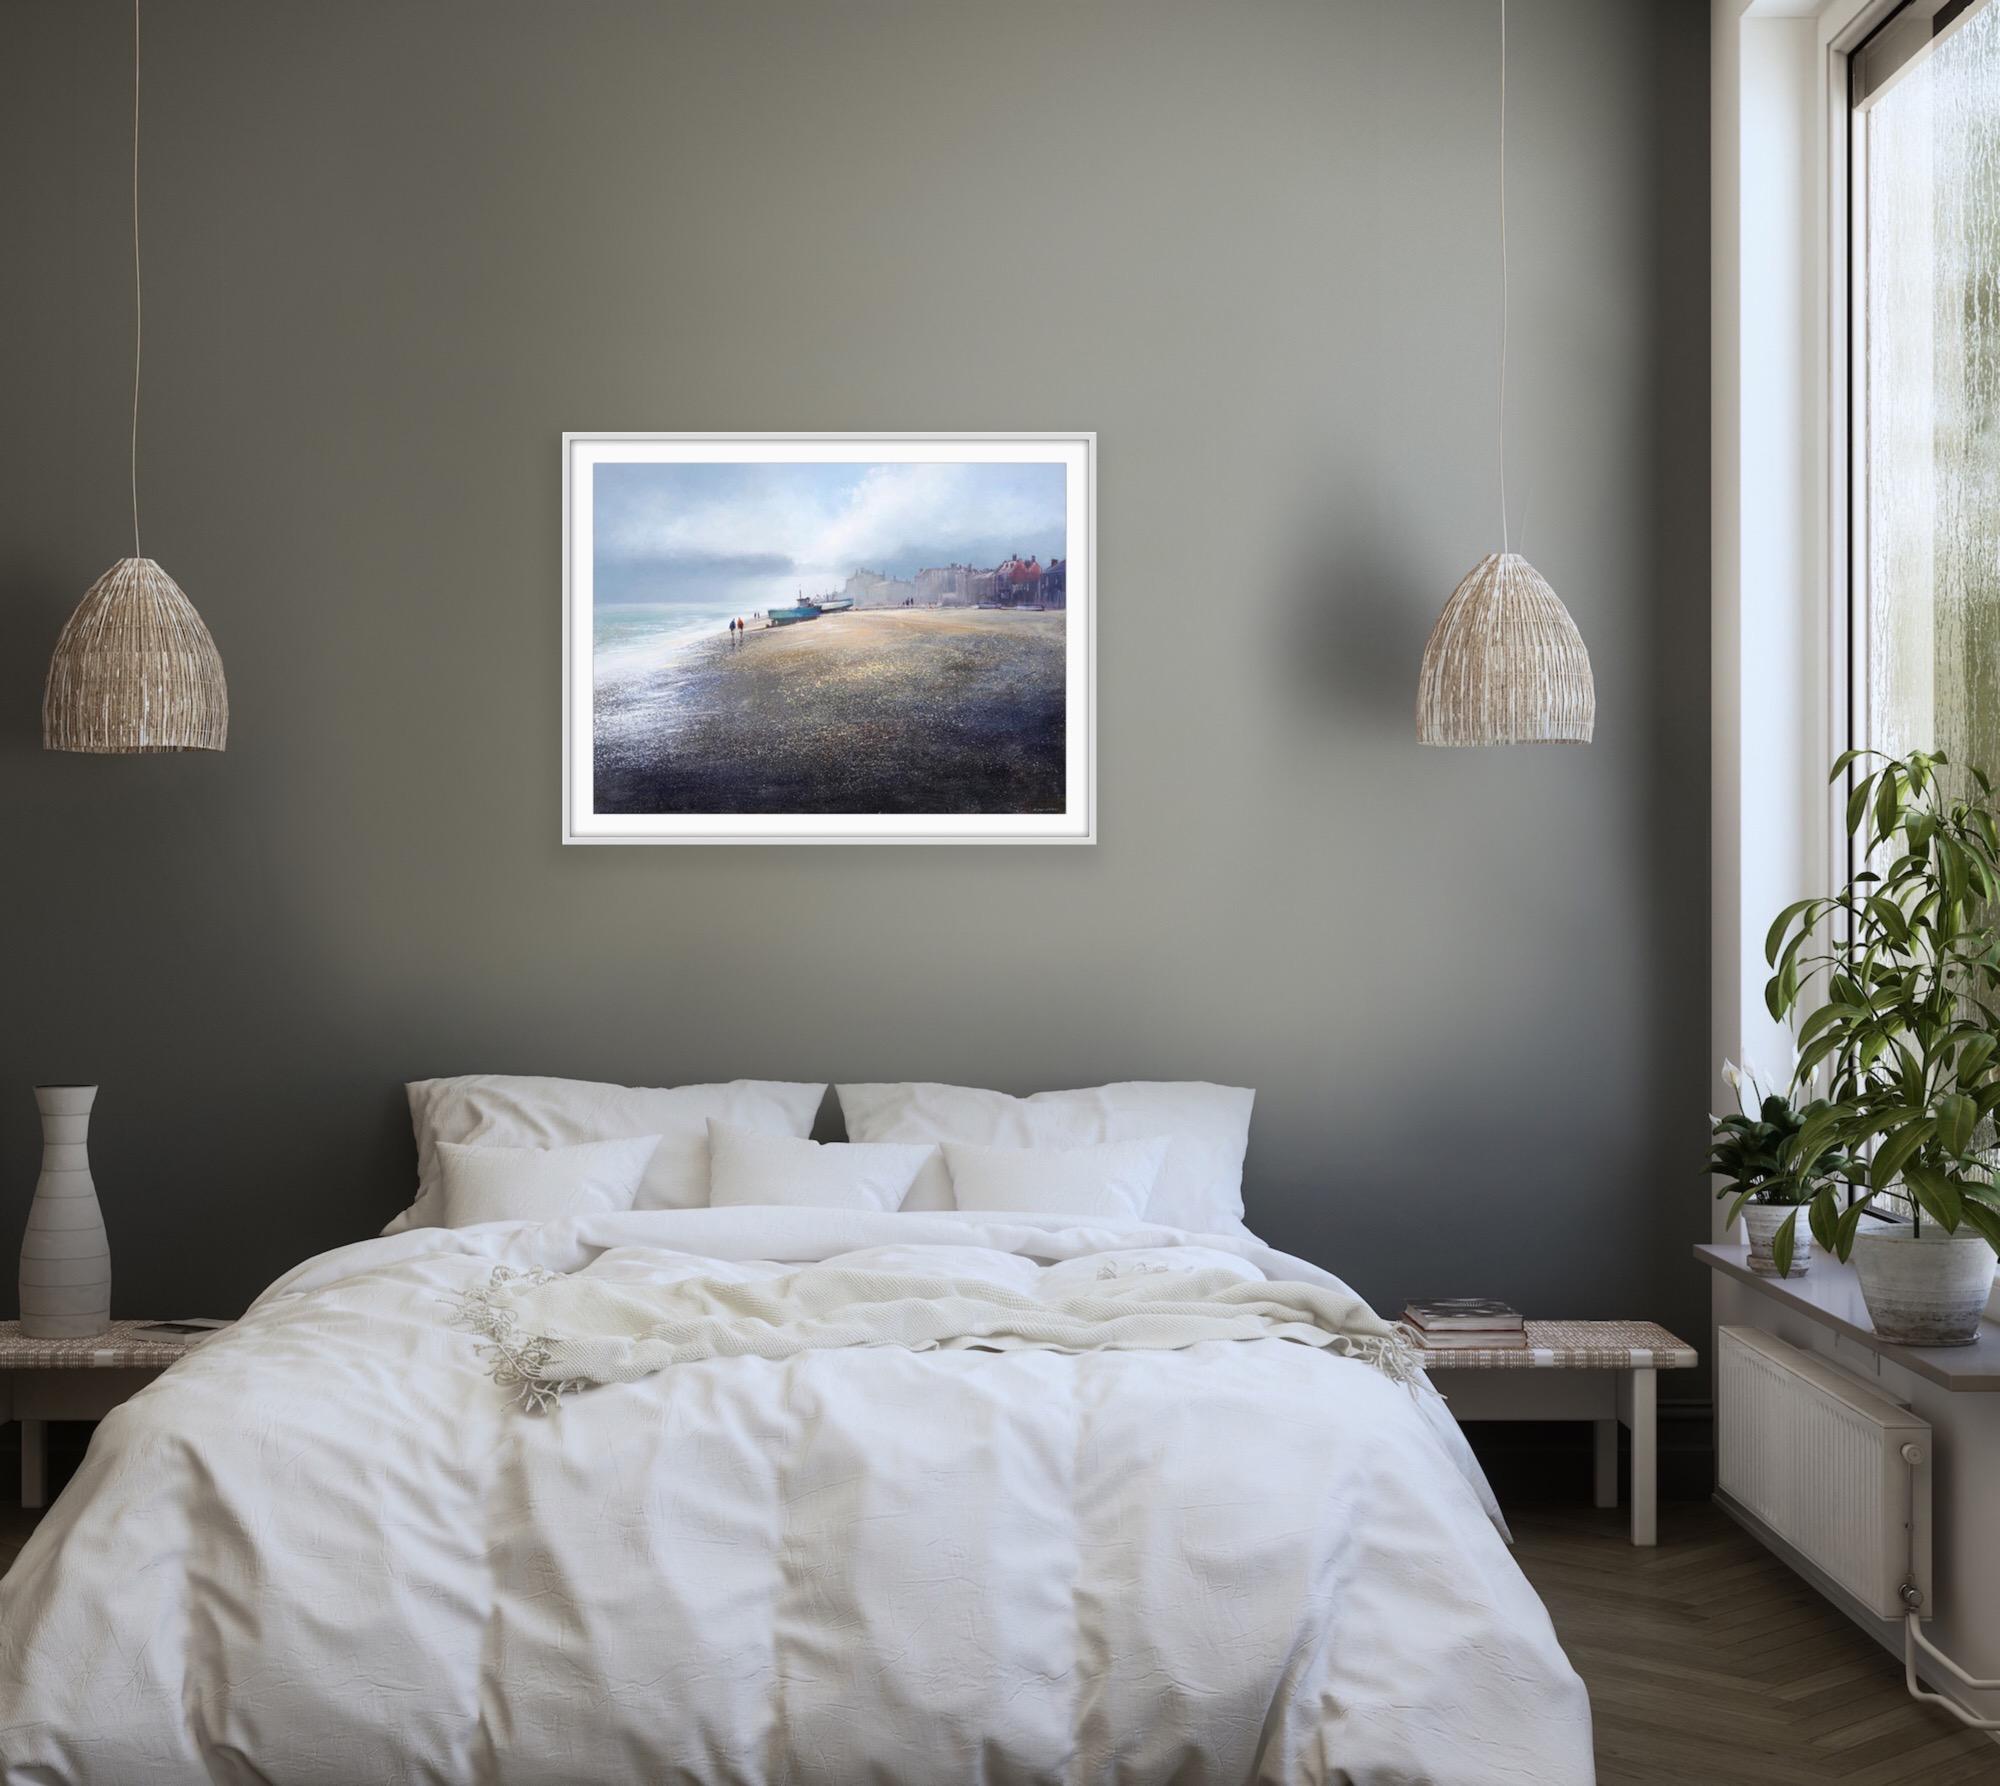 The Beach Aldeburgh, limited edition giclee print.

These stunning prints are created using fine art archival quality inks and canvas with three layers of UV varnish to protect the artwork and enhance the colours. These deep edge box canvases are